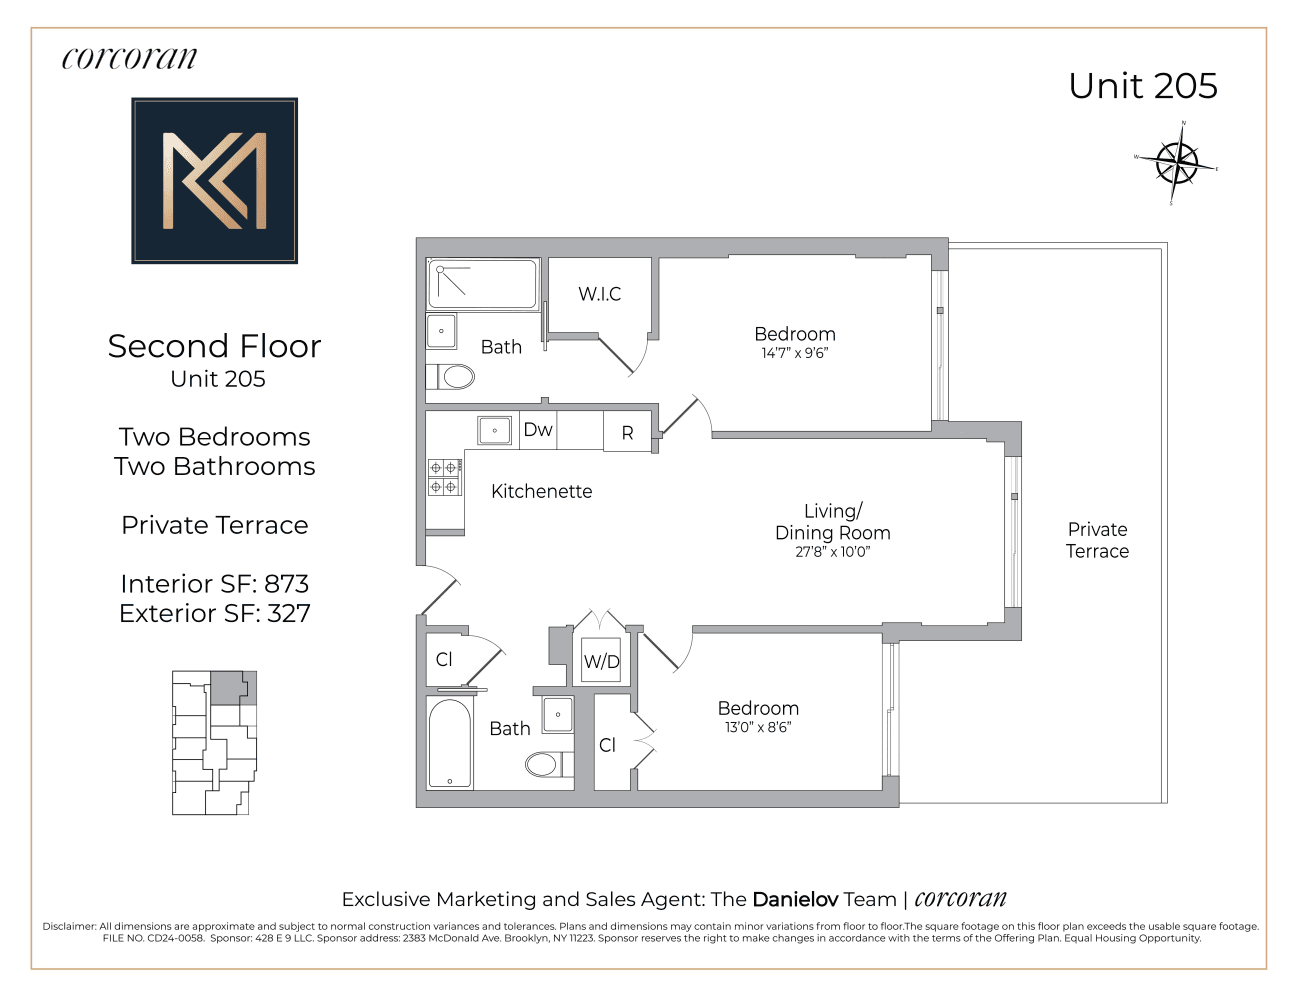 Welcome to Kensington Manor, a distinguished residential development and a suburban oasis in the heart of the city.